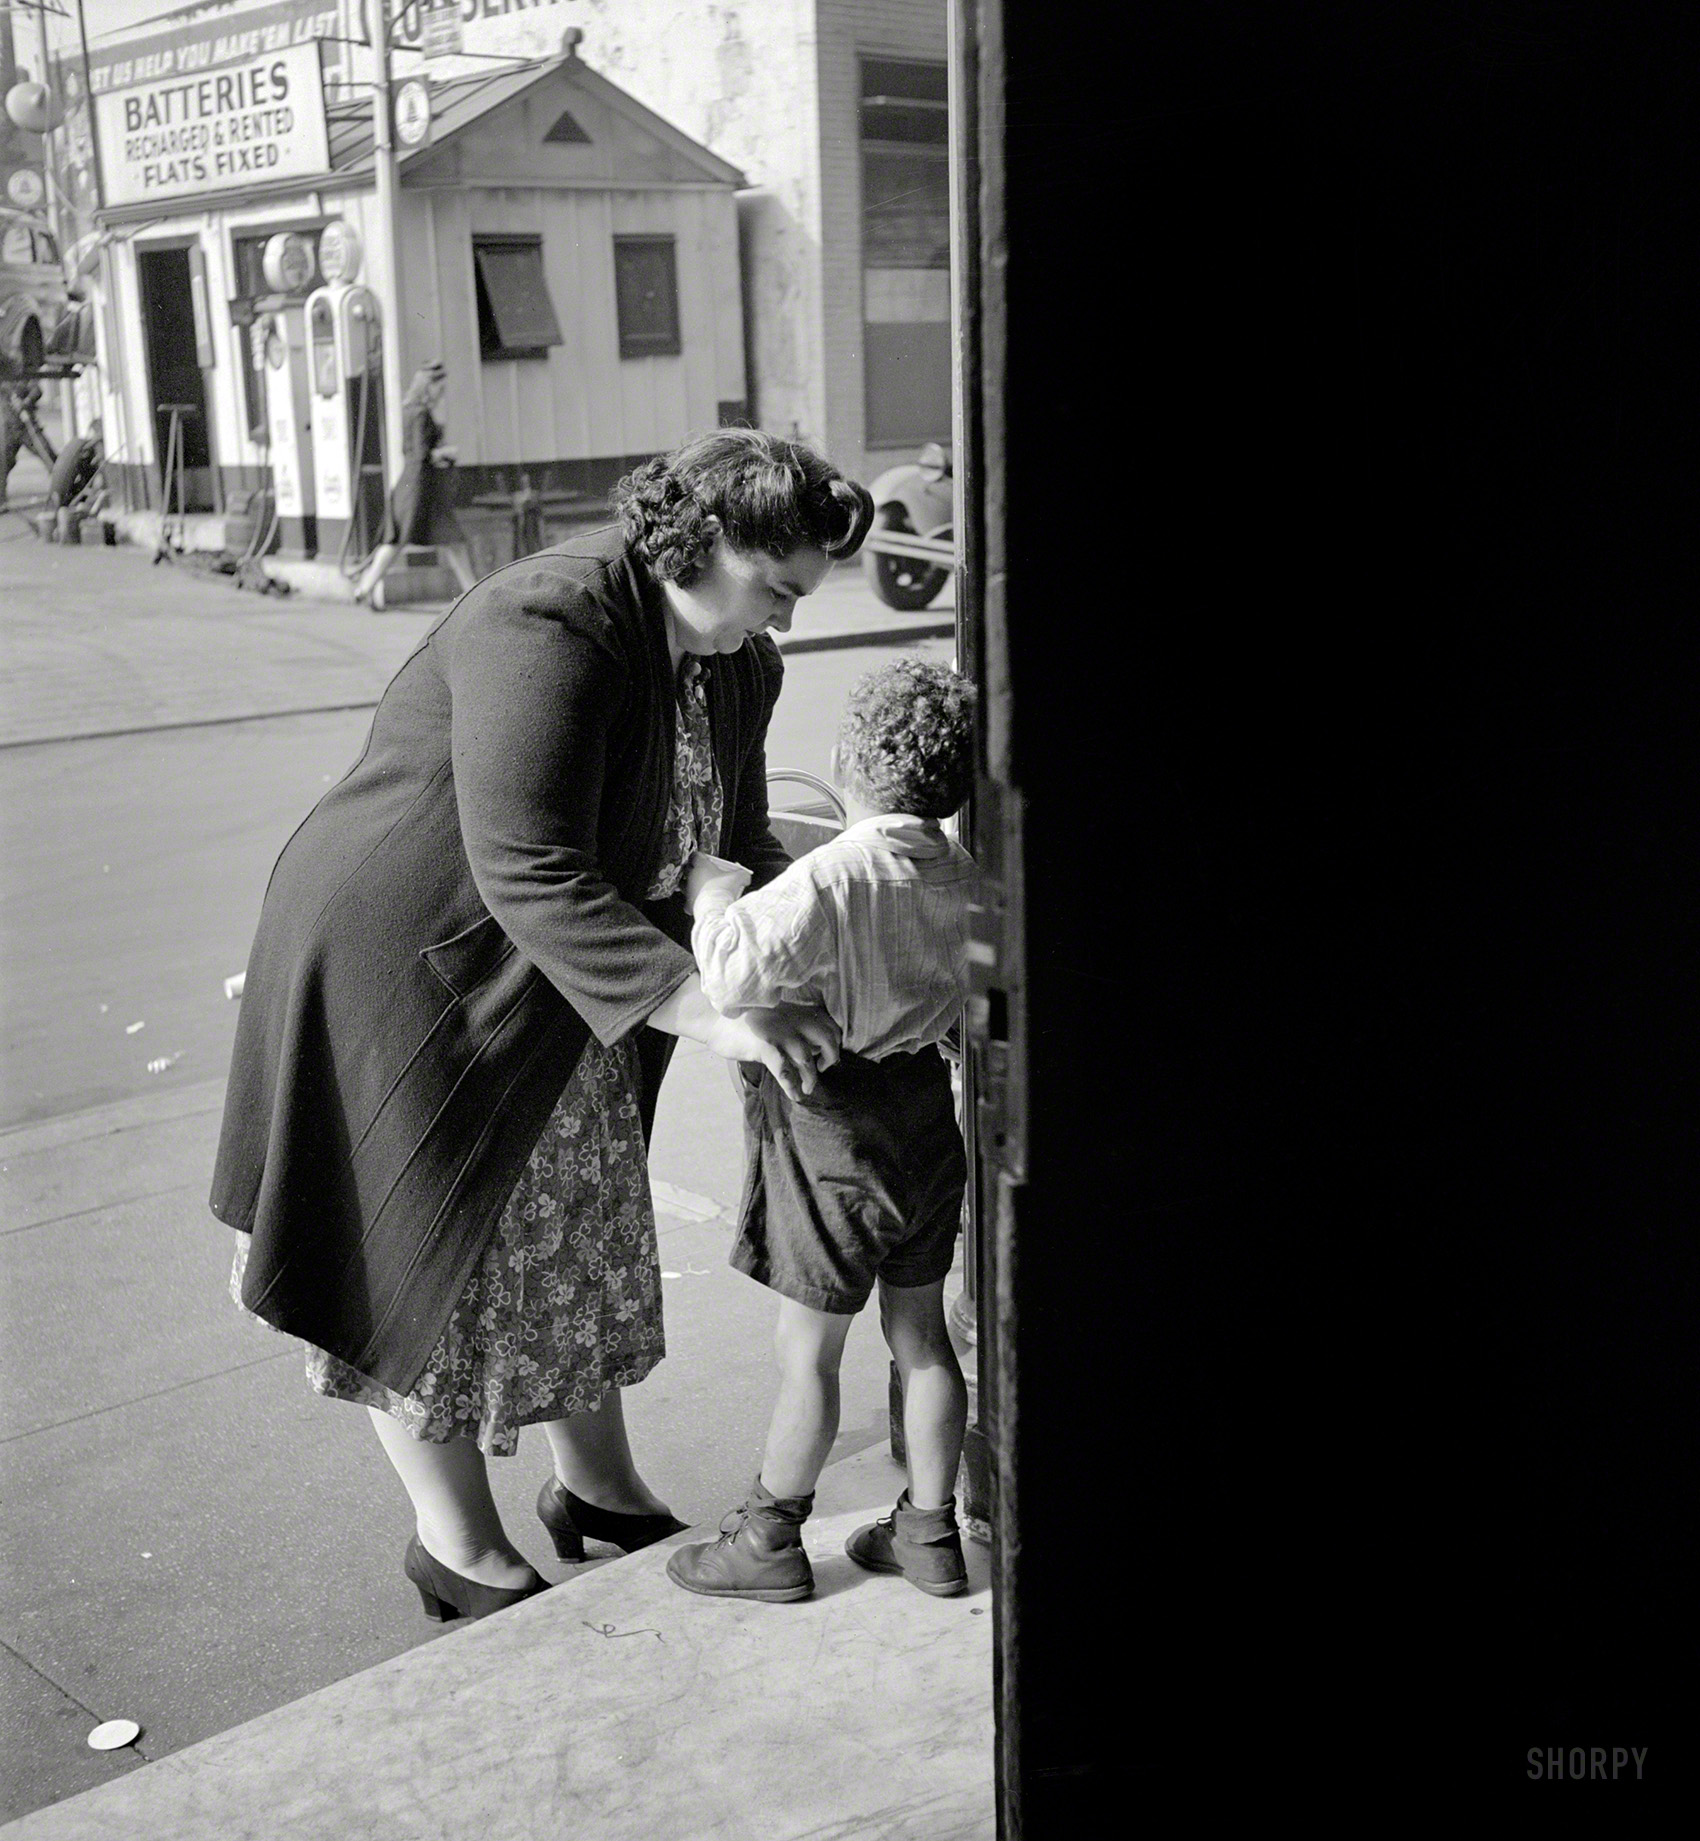 May 1944. "New York. A small boy who receives day care at Greenwich House while his mother works." And more of that service station across the street. Photo by Risdon Tillery for the Office of War Information. View full size.